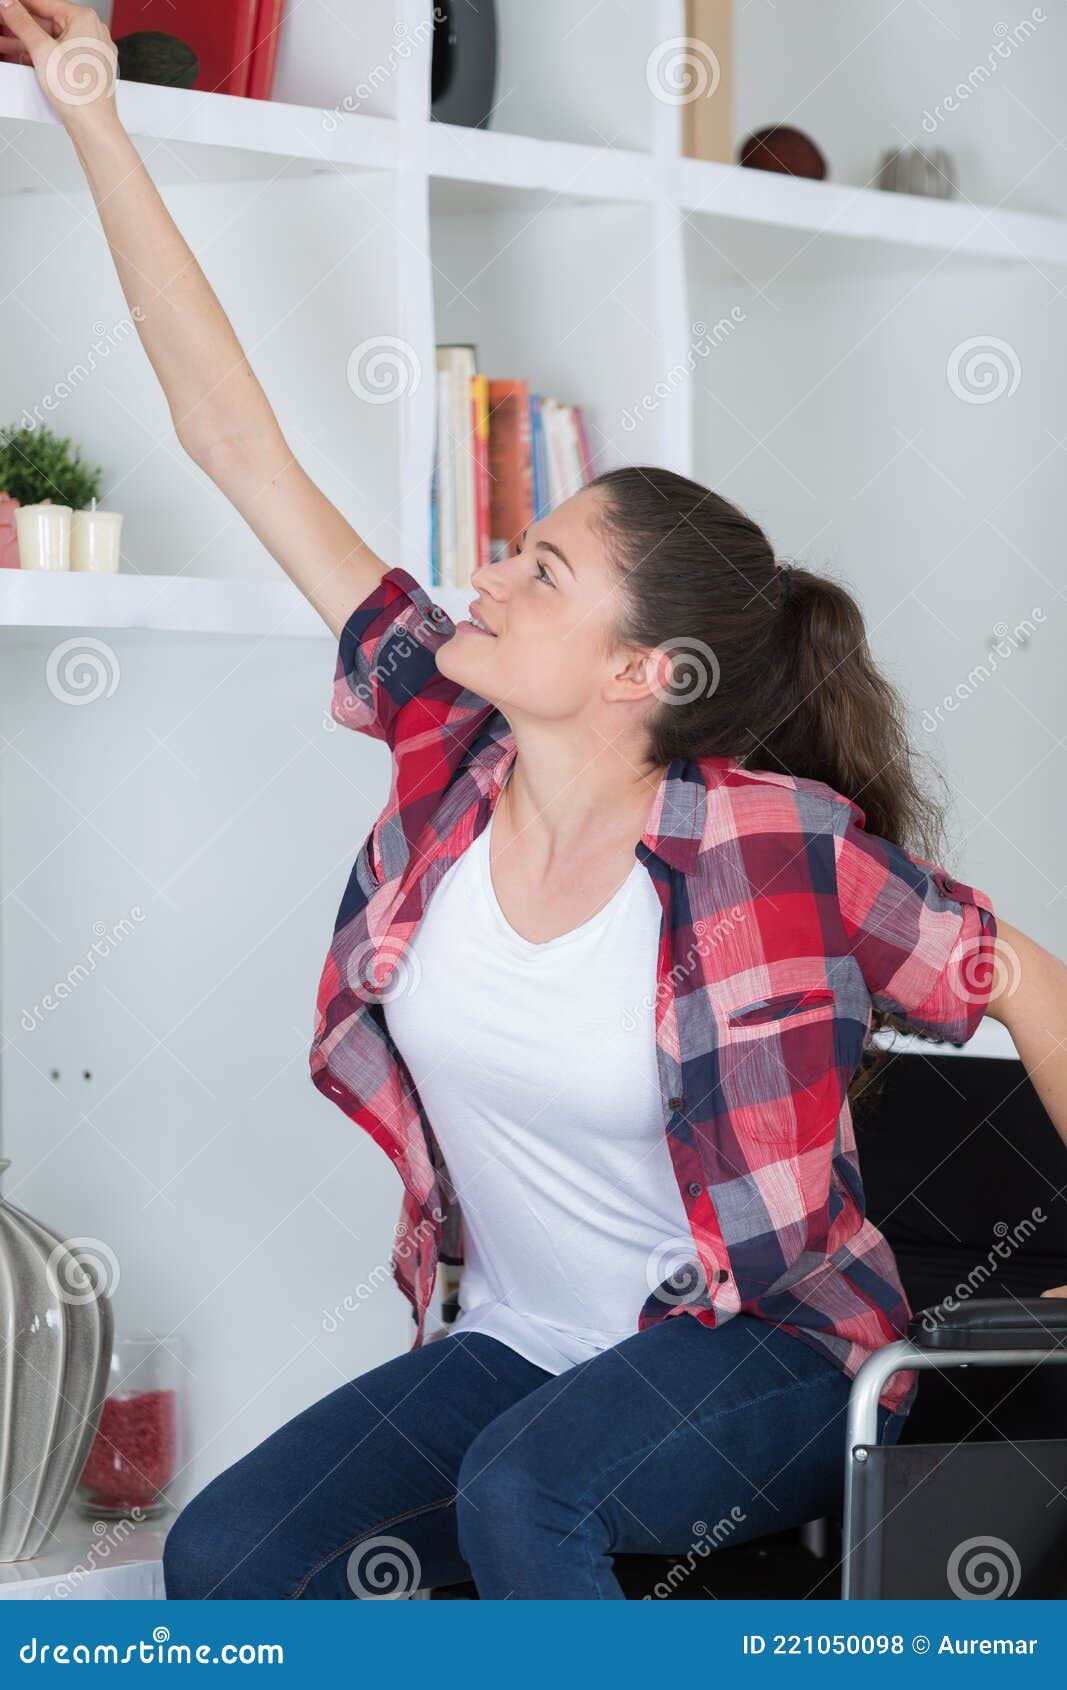 woman-in-wheelchair-reaching-for-something-from-living-room-shelf-stock